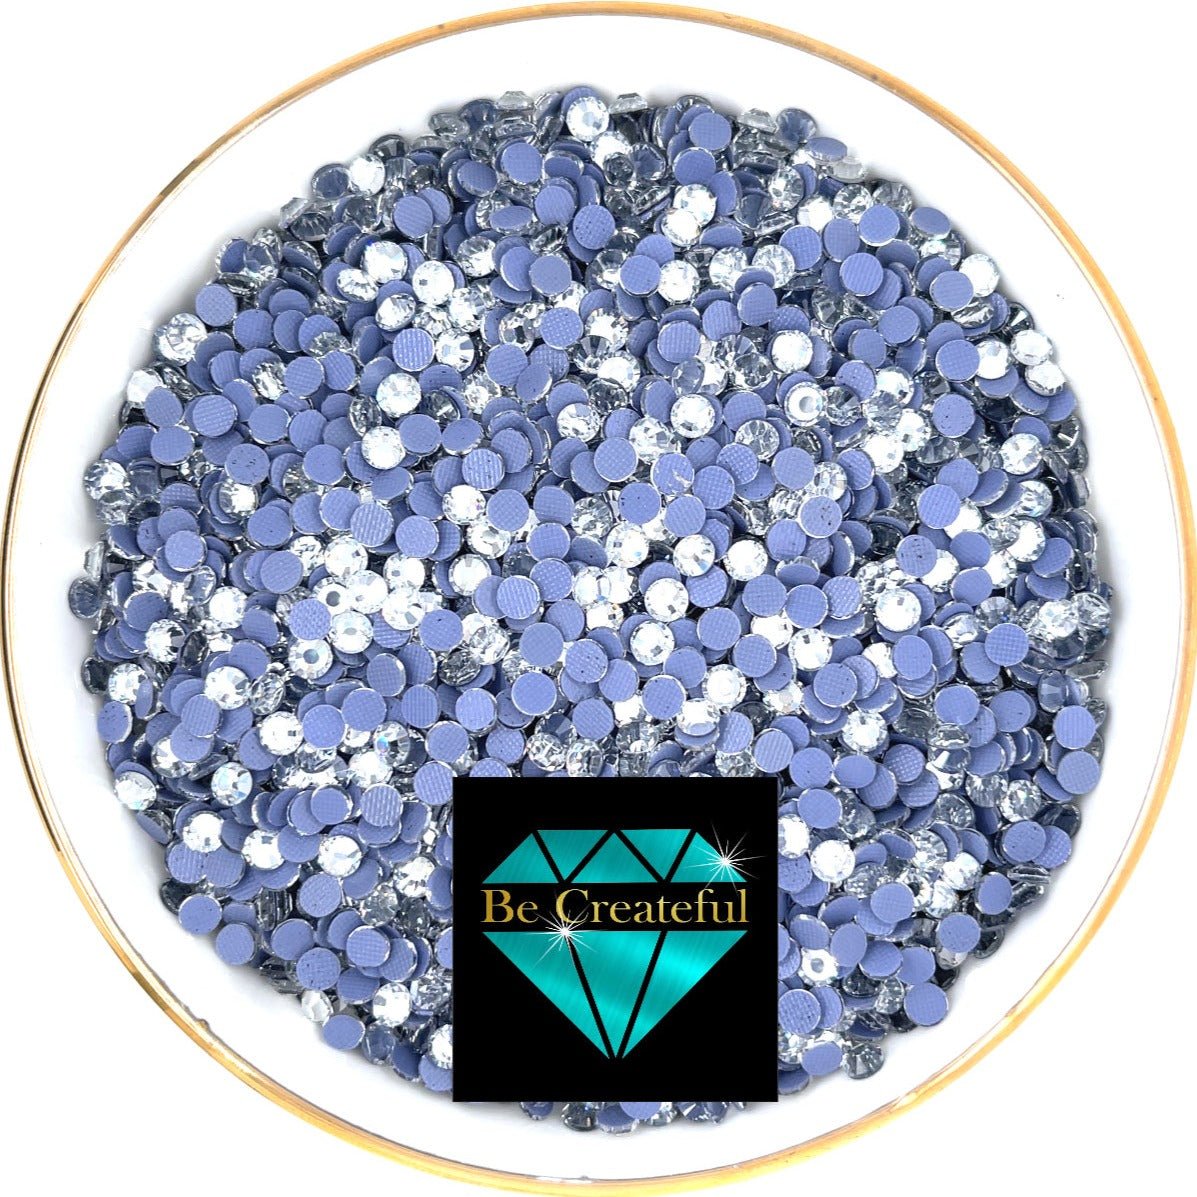 Intensity Crystal Hotfix Glass Rhinestones - Bling Your Things